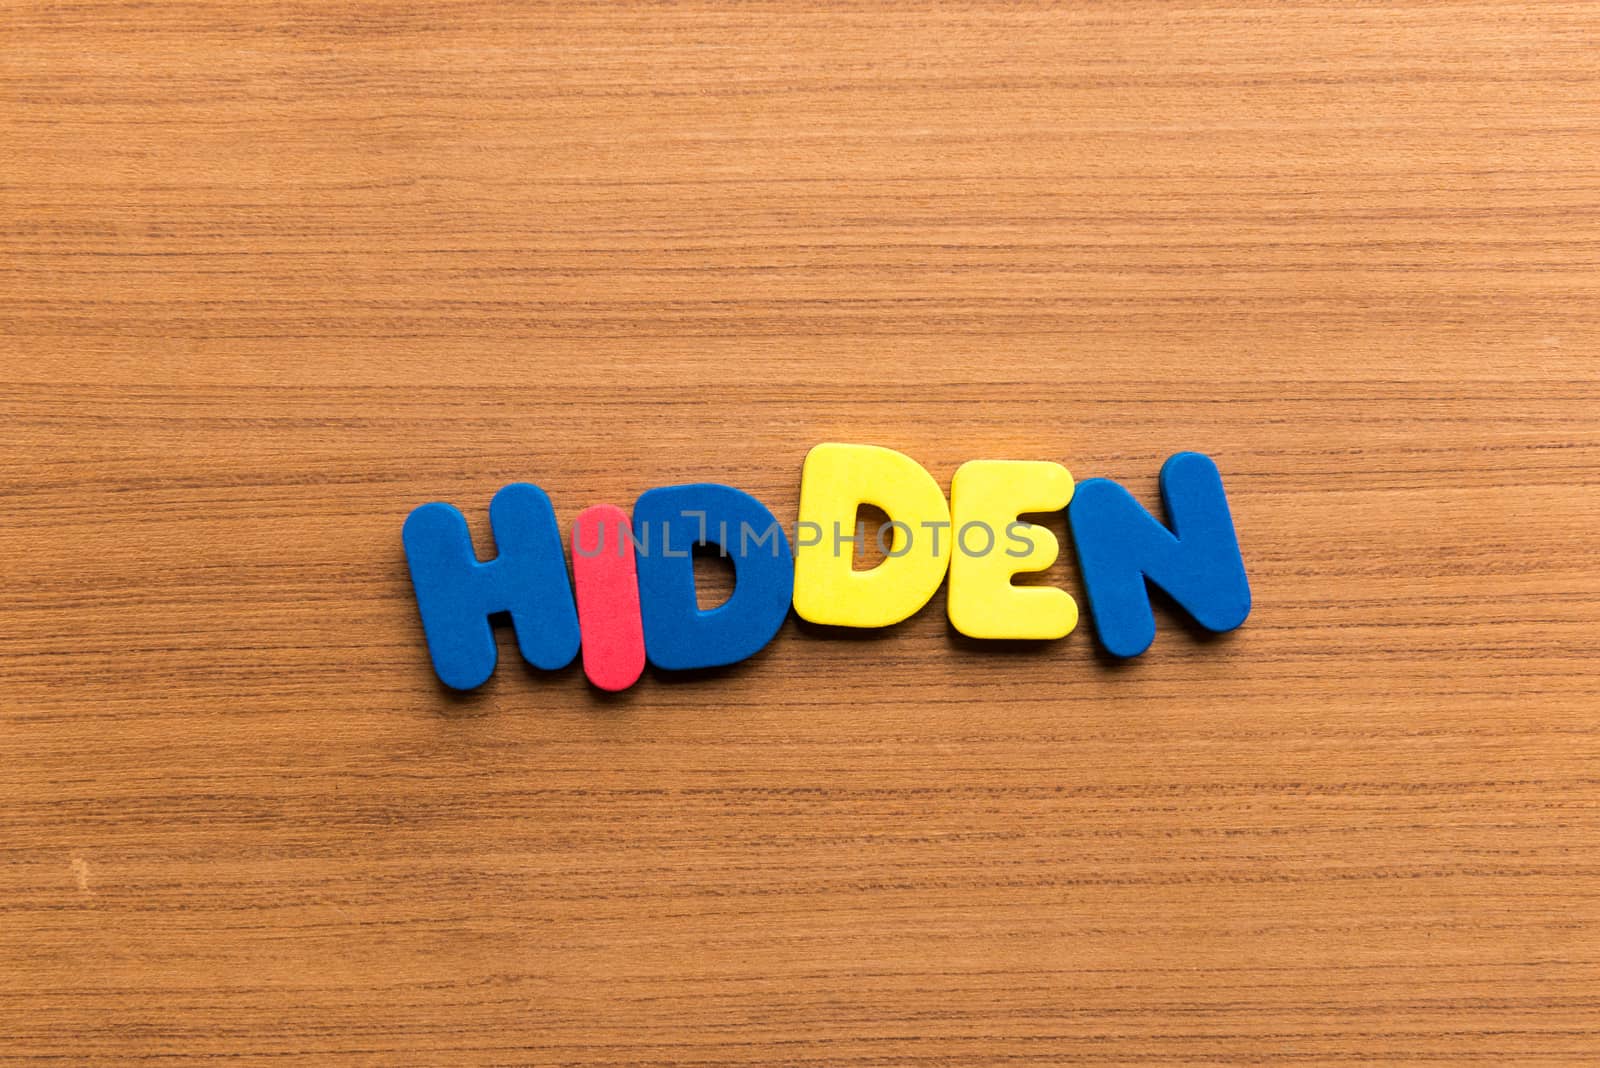 hidden colorful word on the wooden background